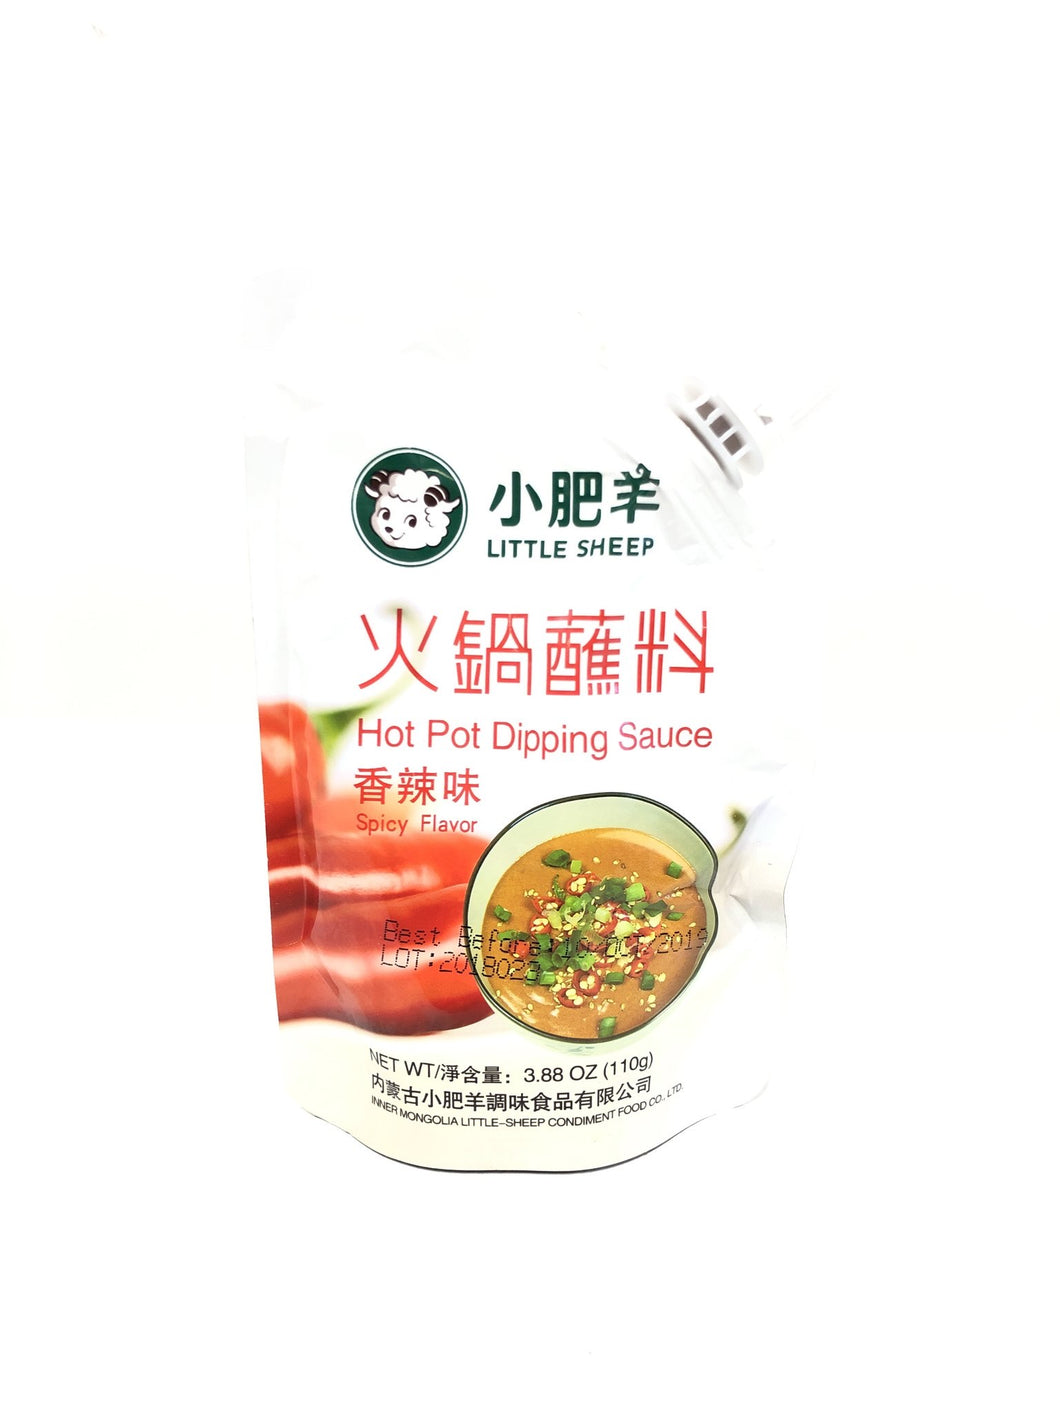 Little Sheep Hot Pot Dipping Sauce - Spicy 110g <br> 小肥羊火鍋蘸料-香辣